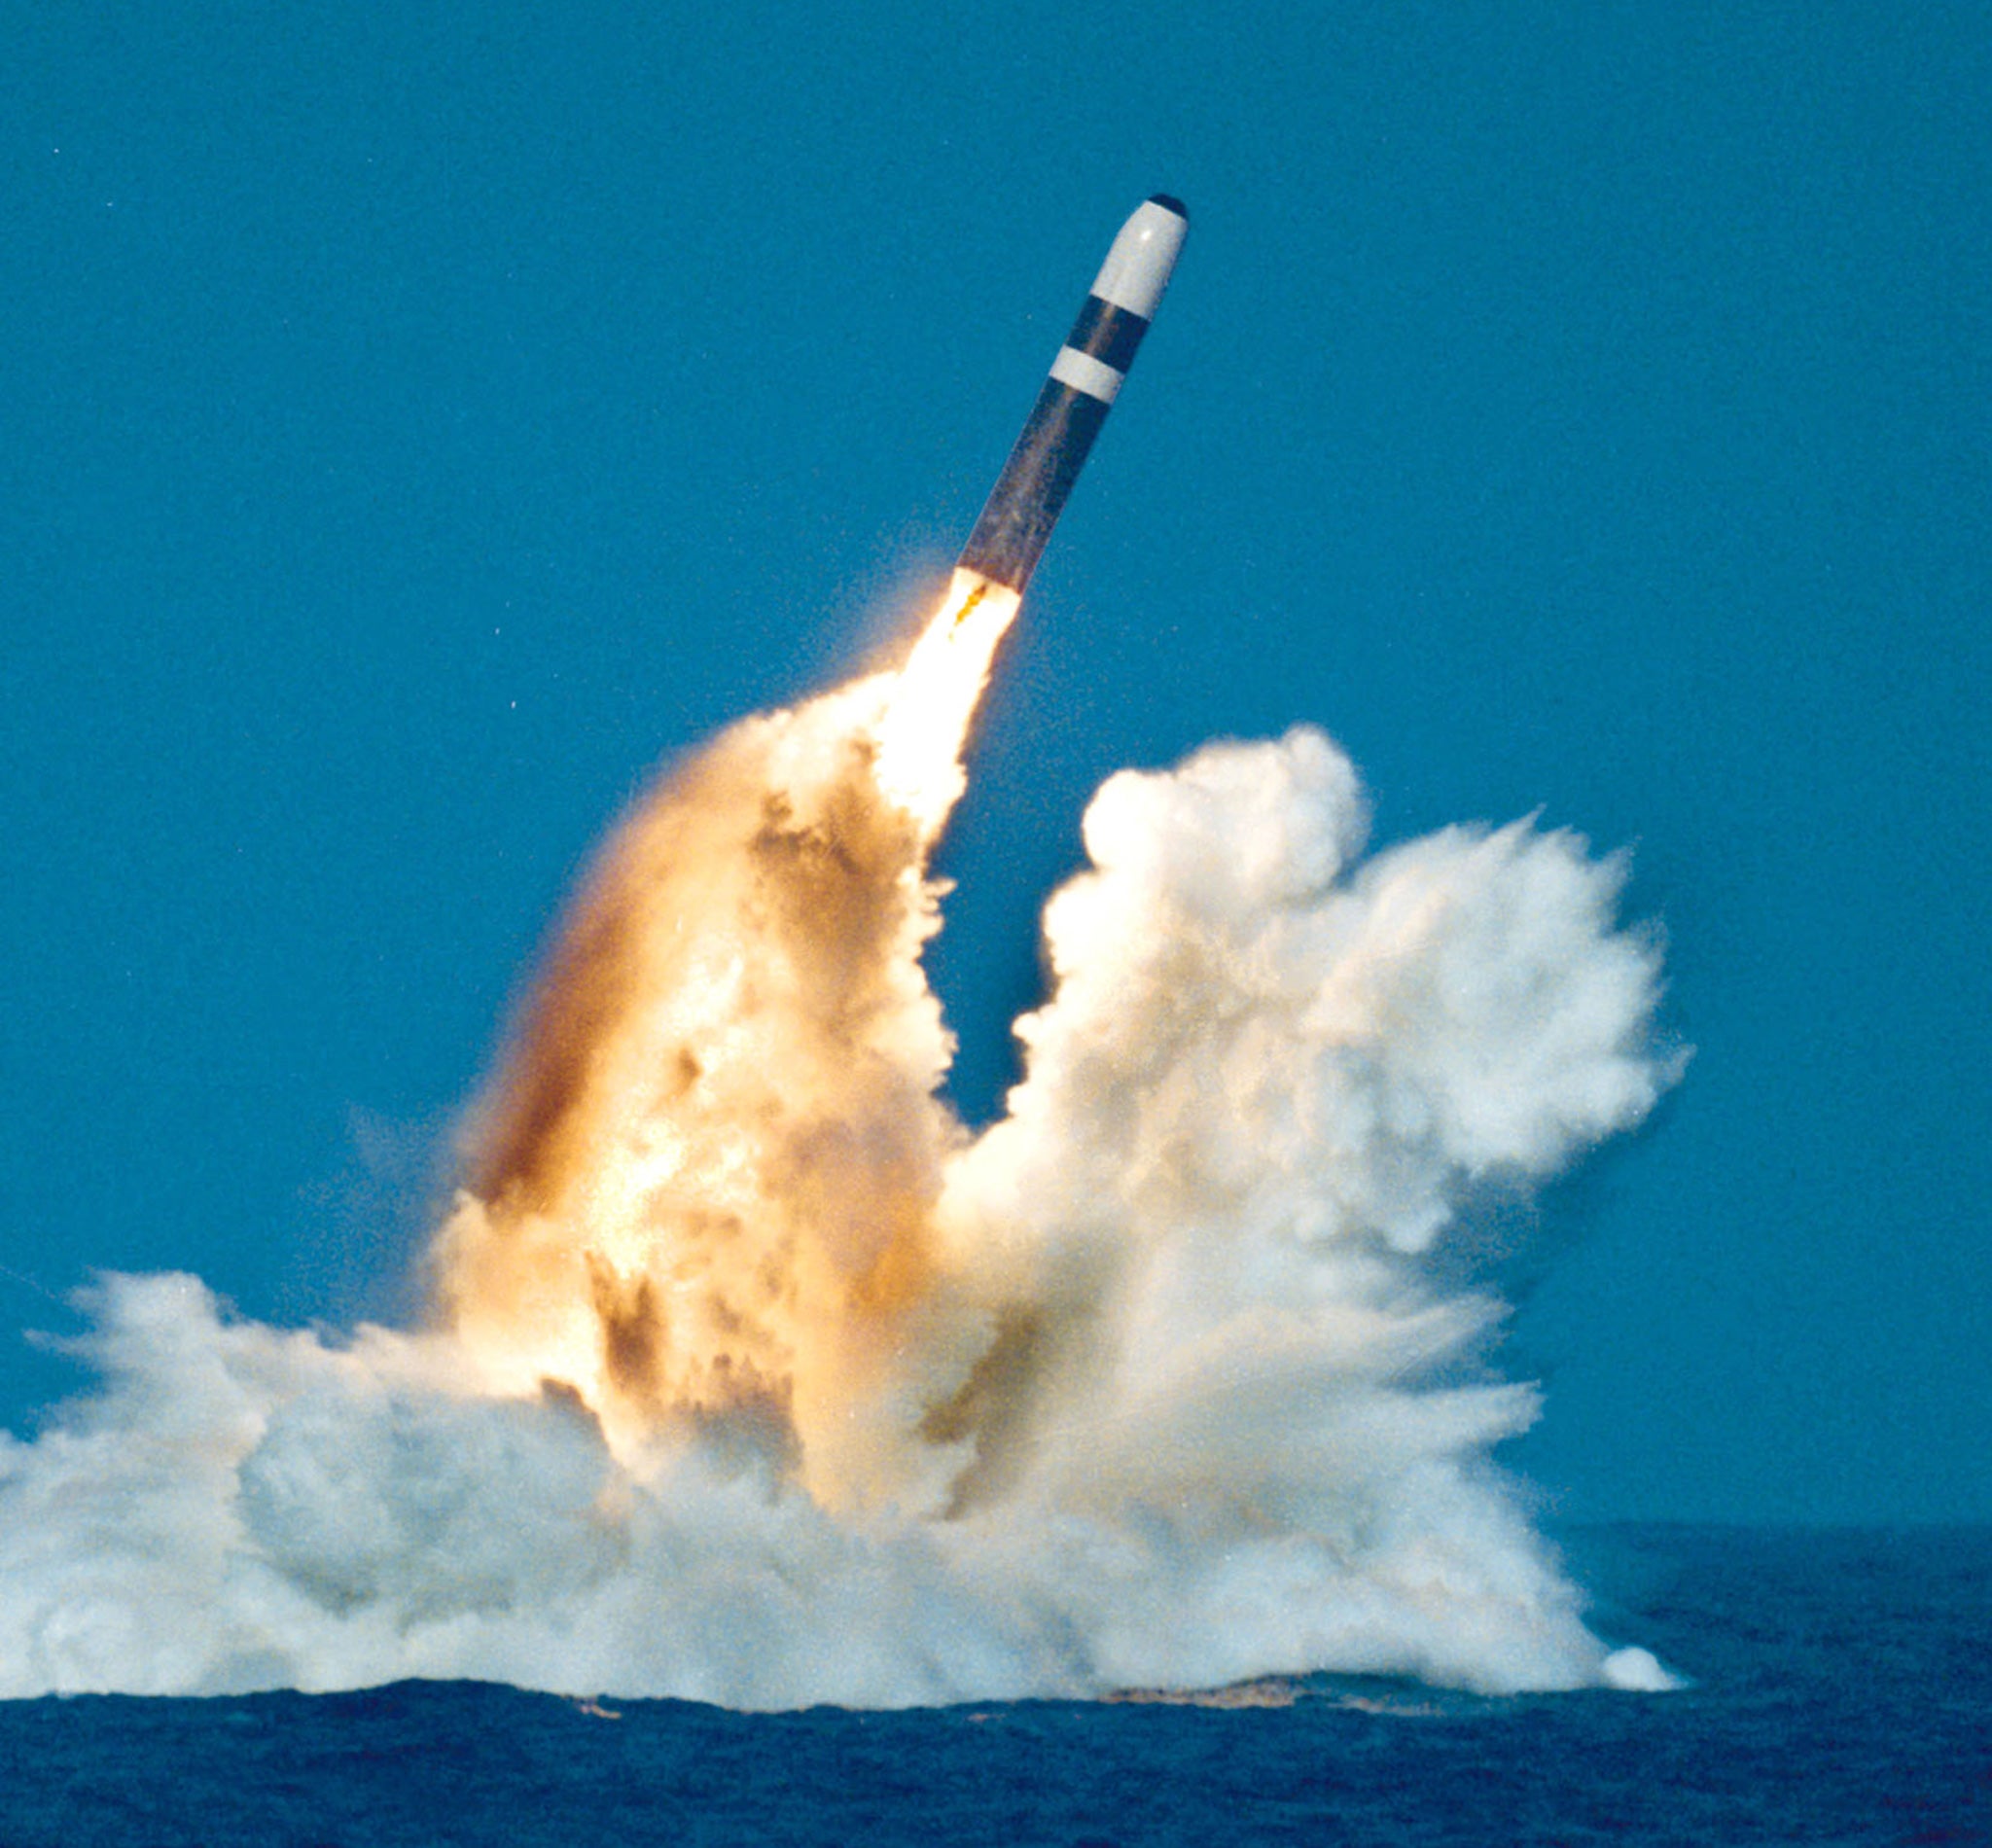 A Trident II, Or D-5 Missile, Is Launched From An Ohio-Class Submarine